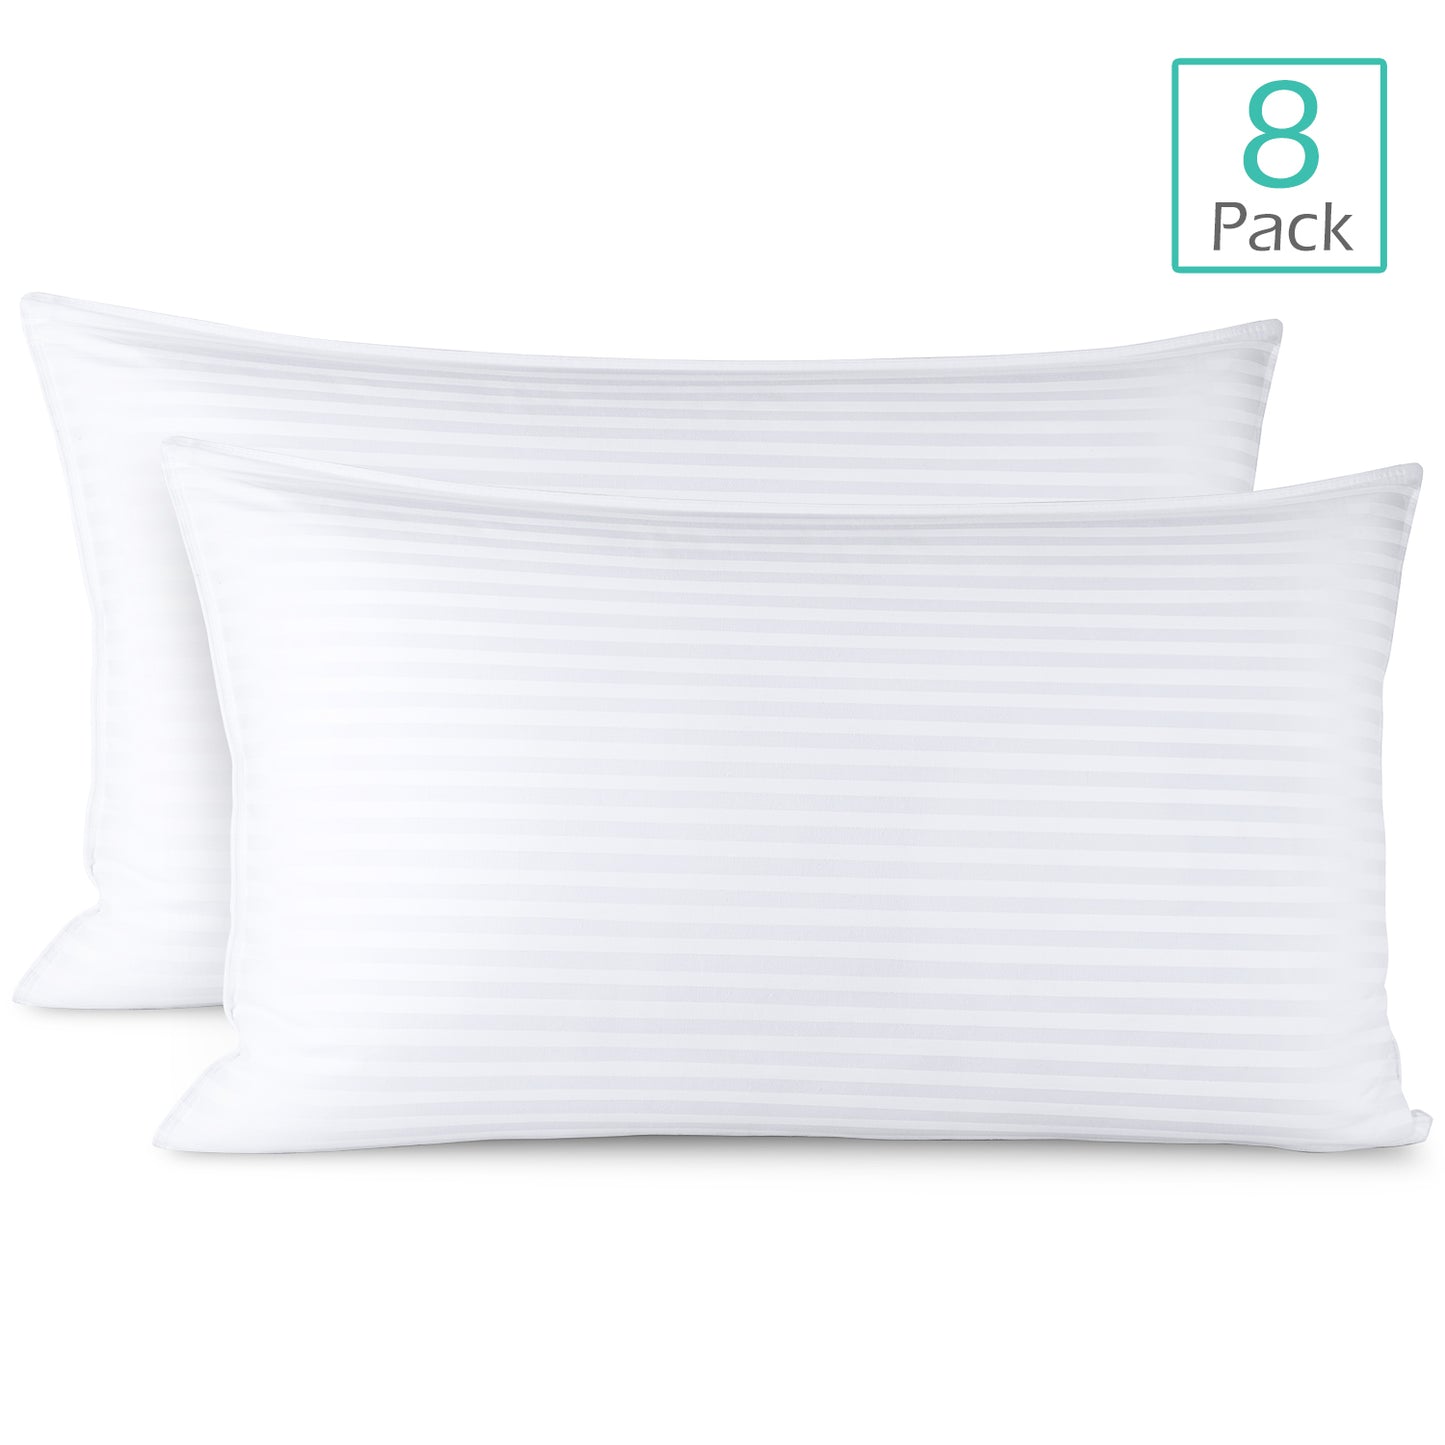 Nestl Bedding Bed Pillows for Sleeping | Down Alternative Sleep Pillows | 100% Cotton Pillow Covers with Poly Fiber Filling | Soft Pillow for Sleeping